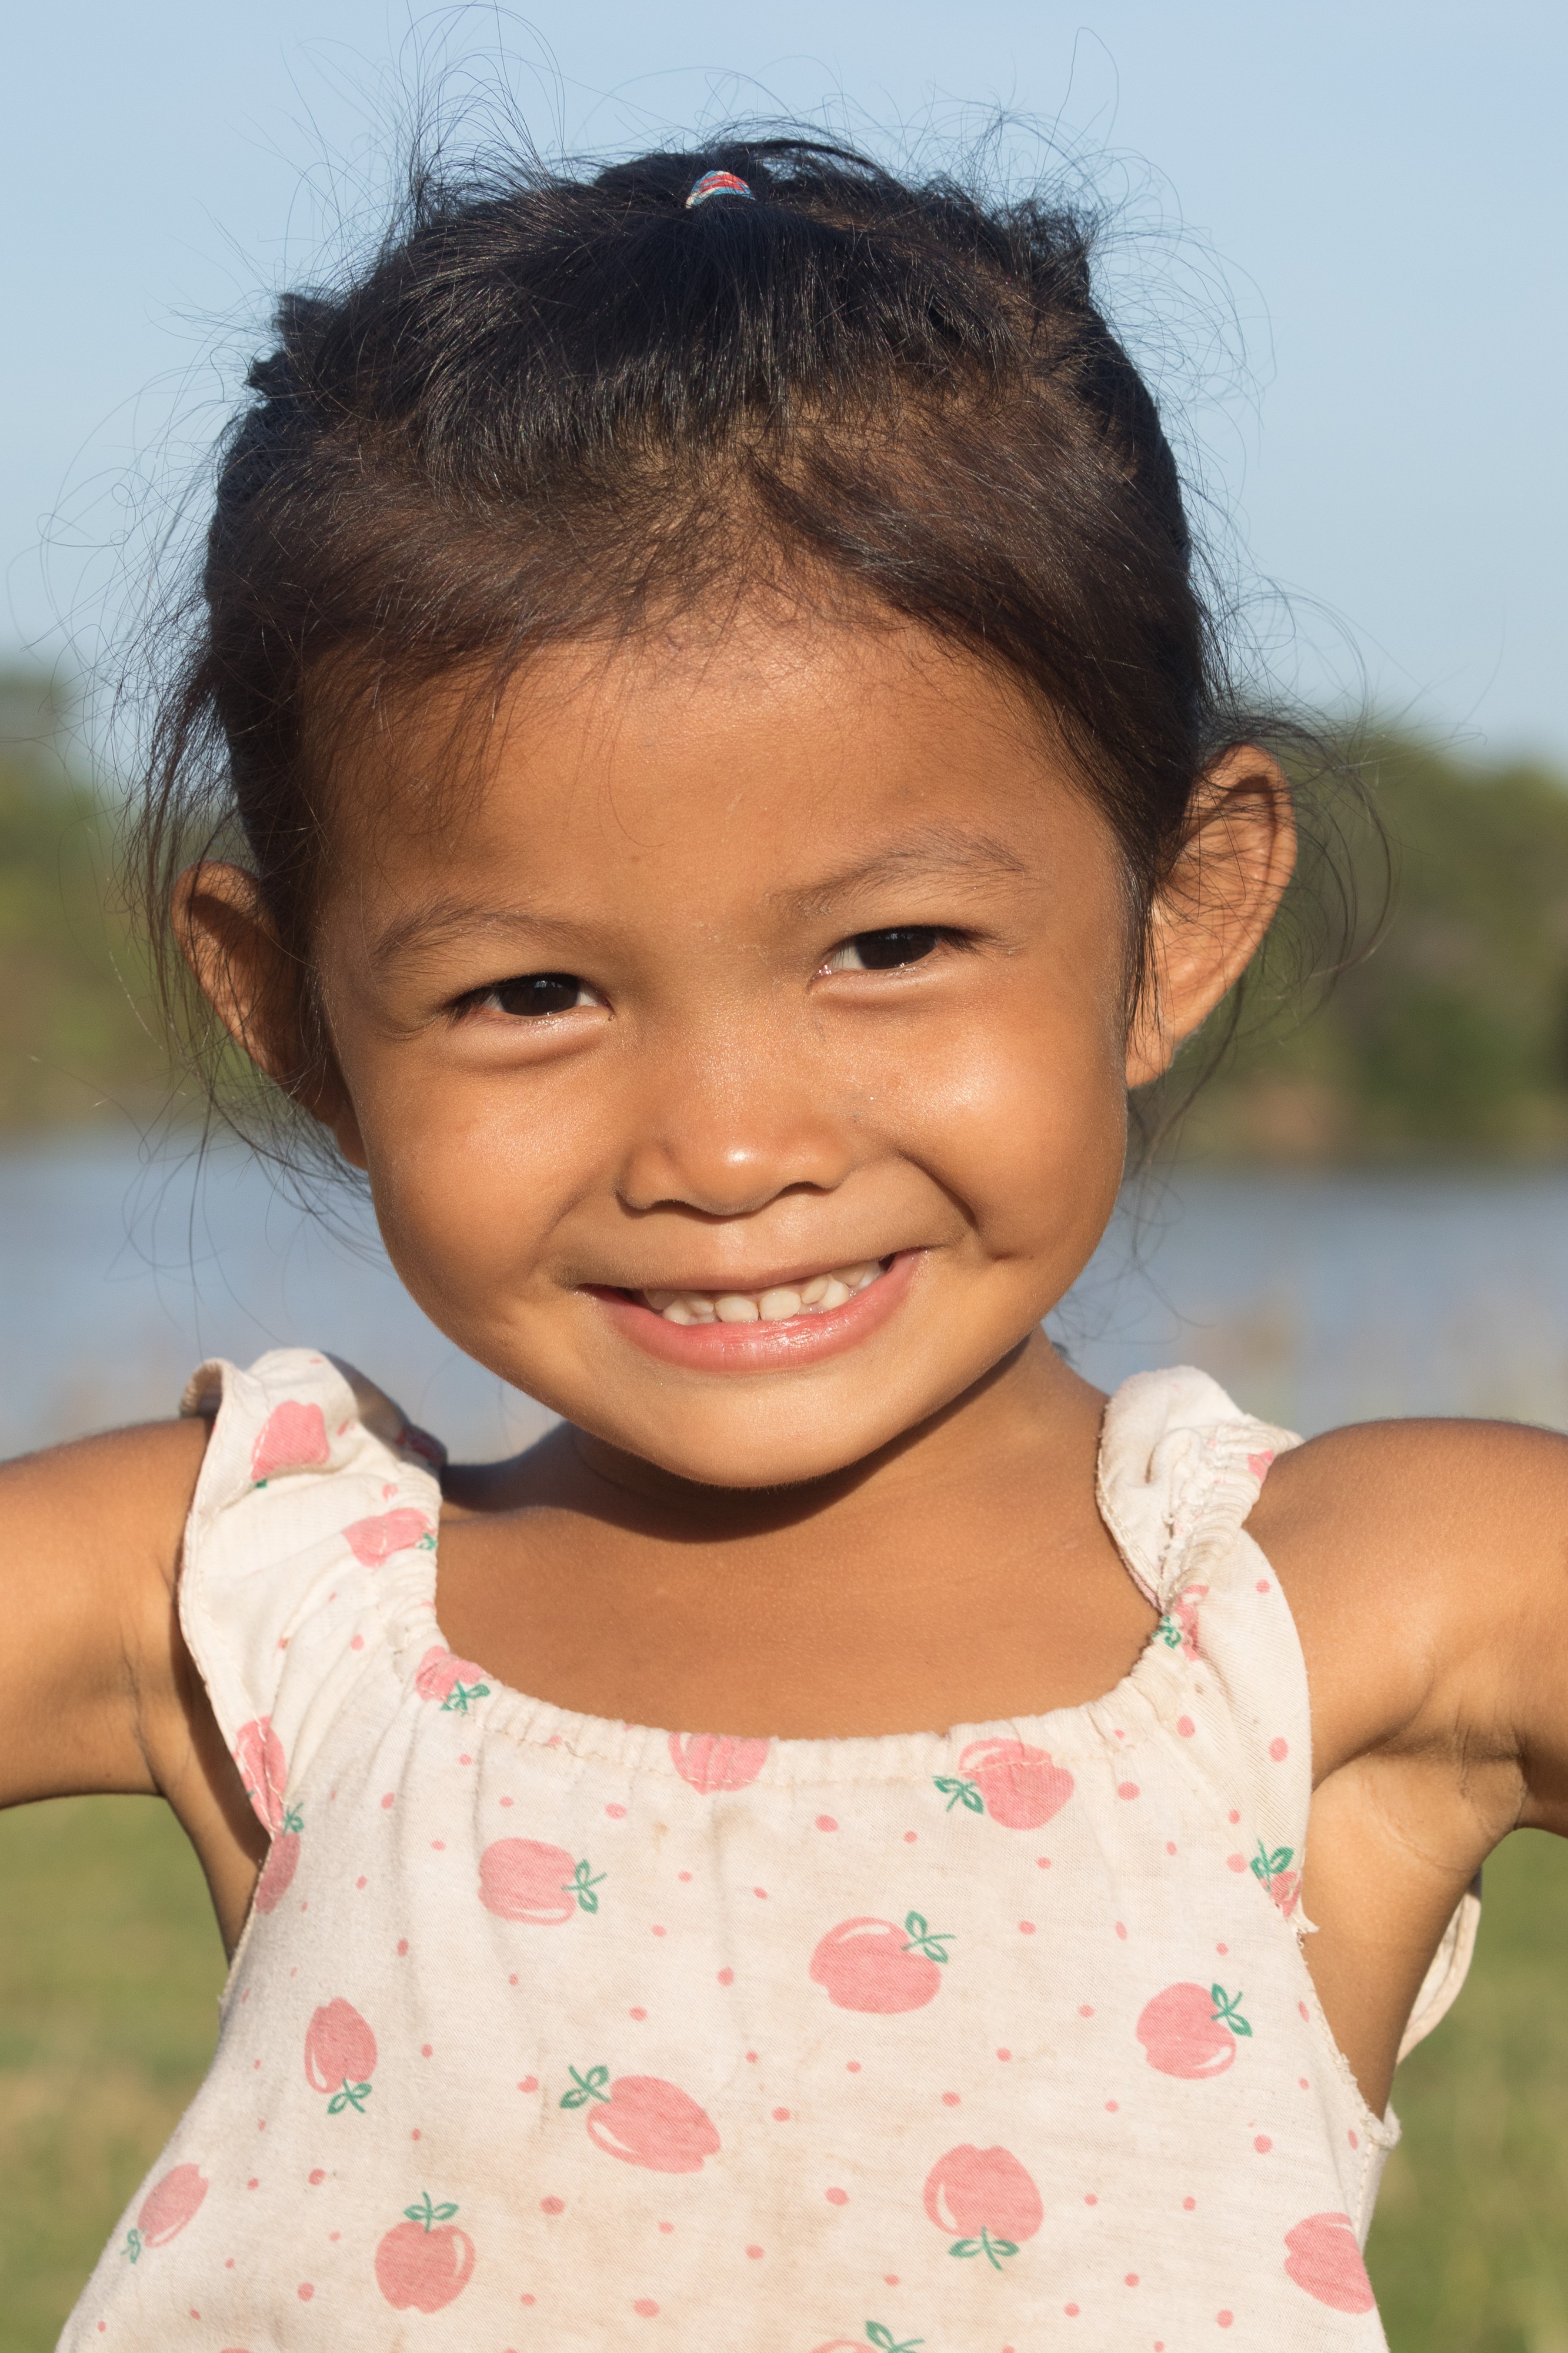 Young girl smiling in sunshine